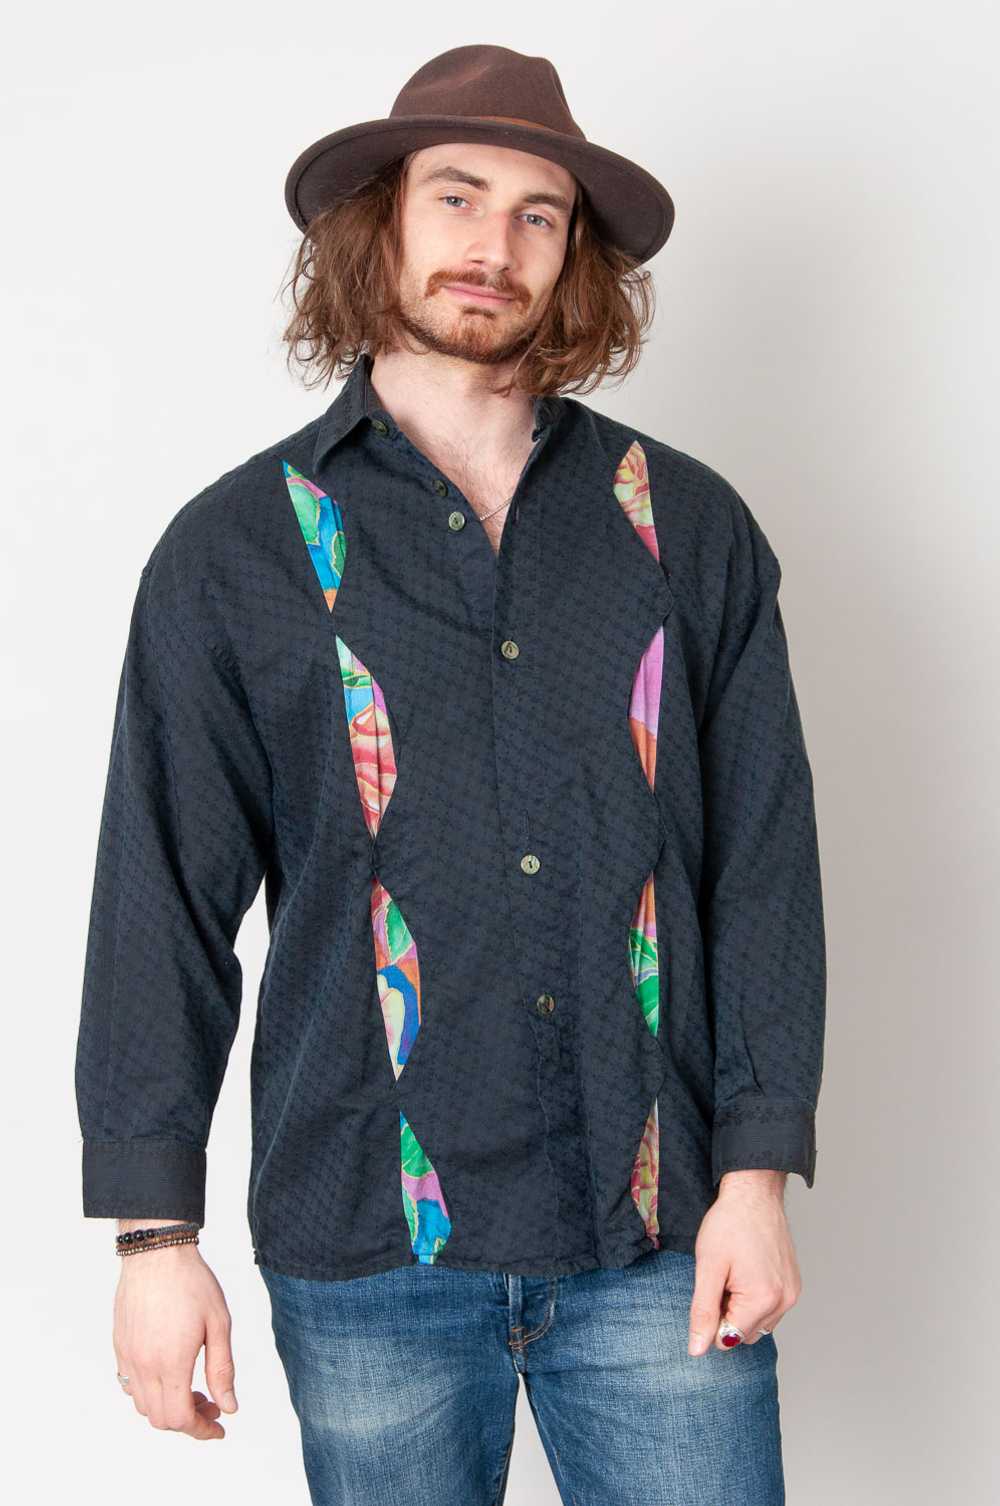 80s Inspired Long Shirt Black With Colorful Cotto… - image 2